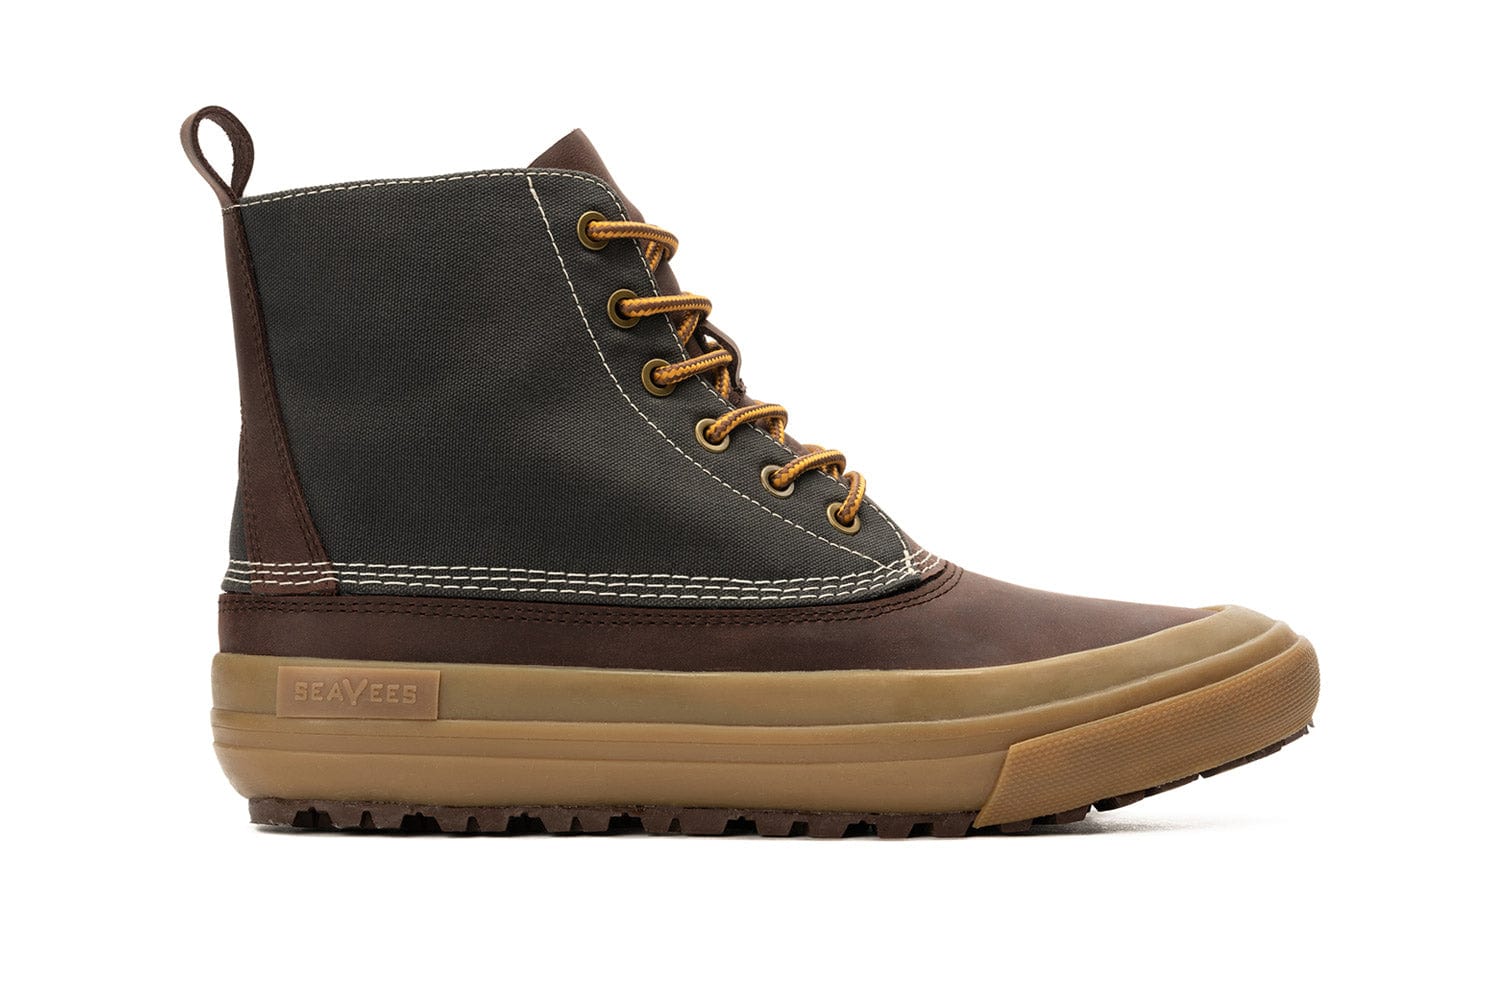 Side view of Hickory/Charcoal Cascade Range Boot with a loop pull on the heel and contrasting brown and gray design.